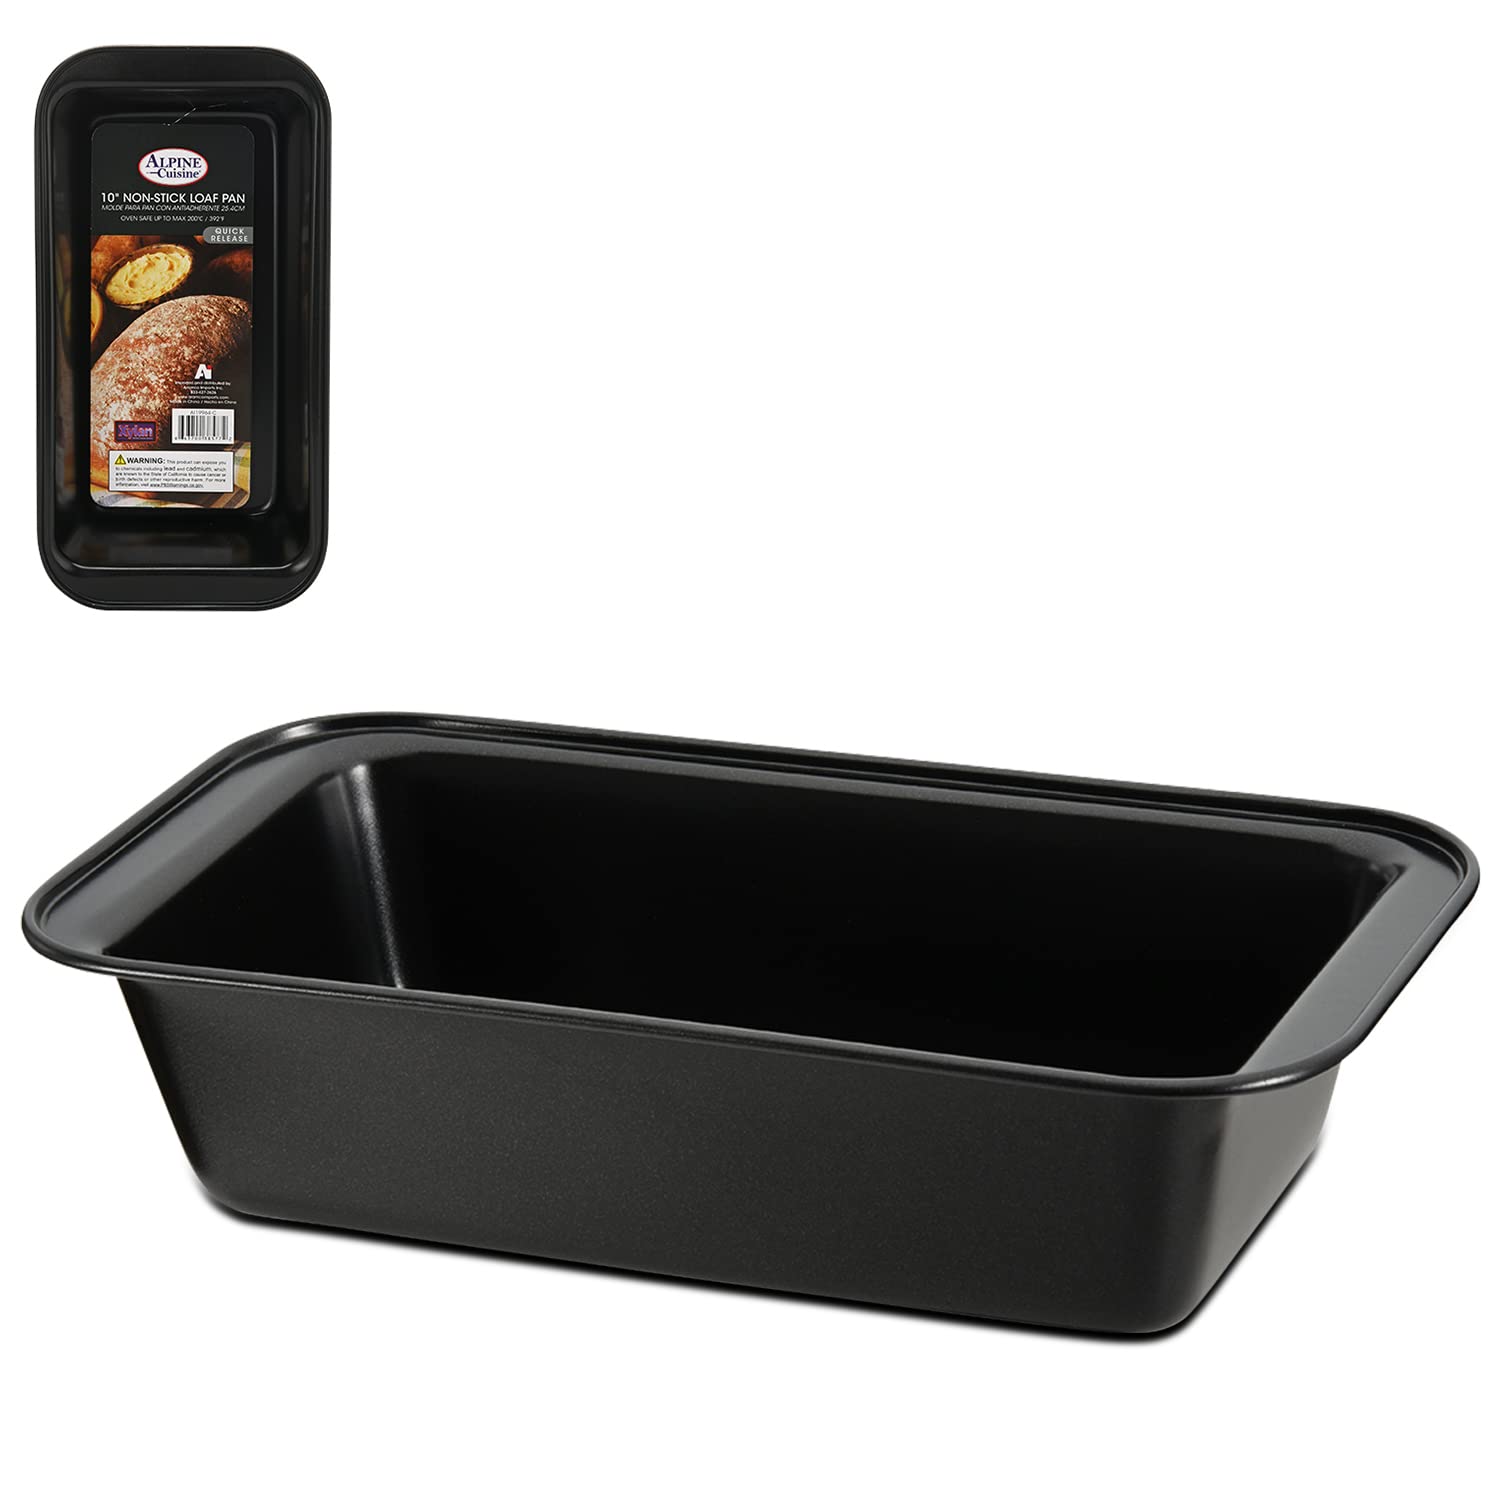 6 Pack Mini Loaf Pans,Non-Stick Baking Bread Pan,Carbon Steel